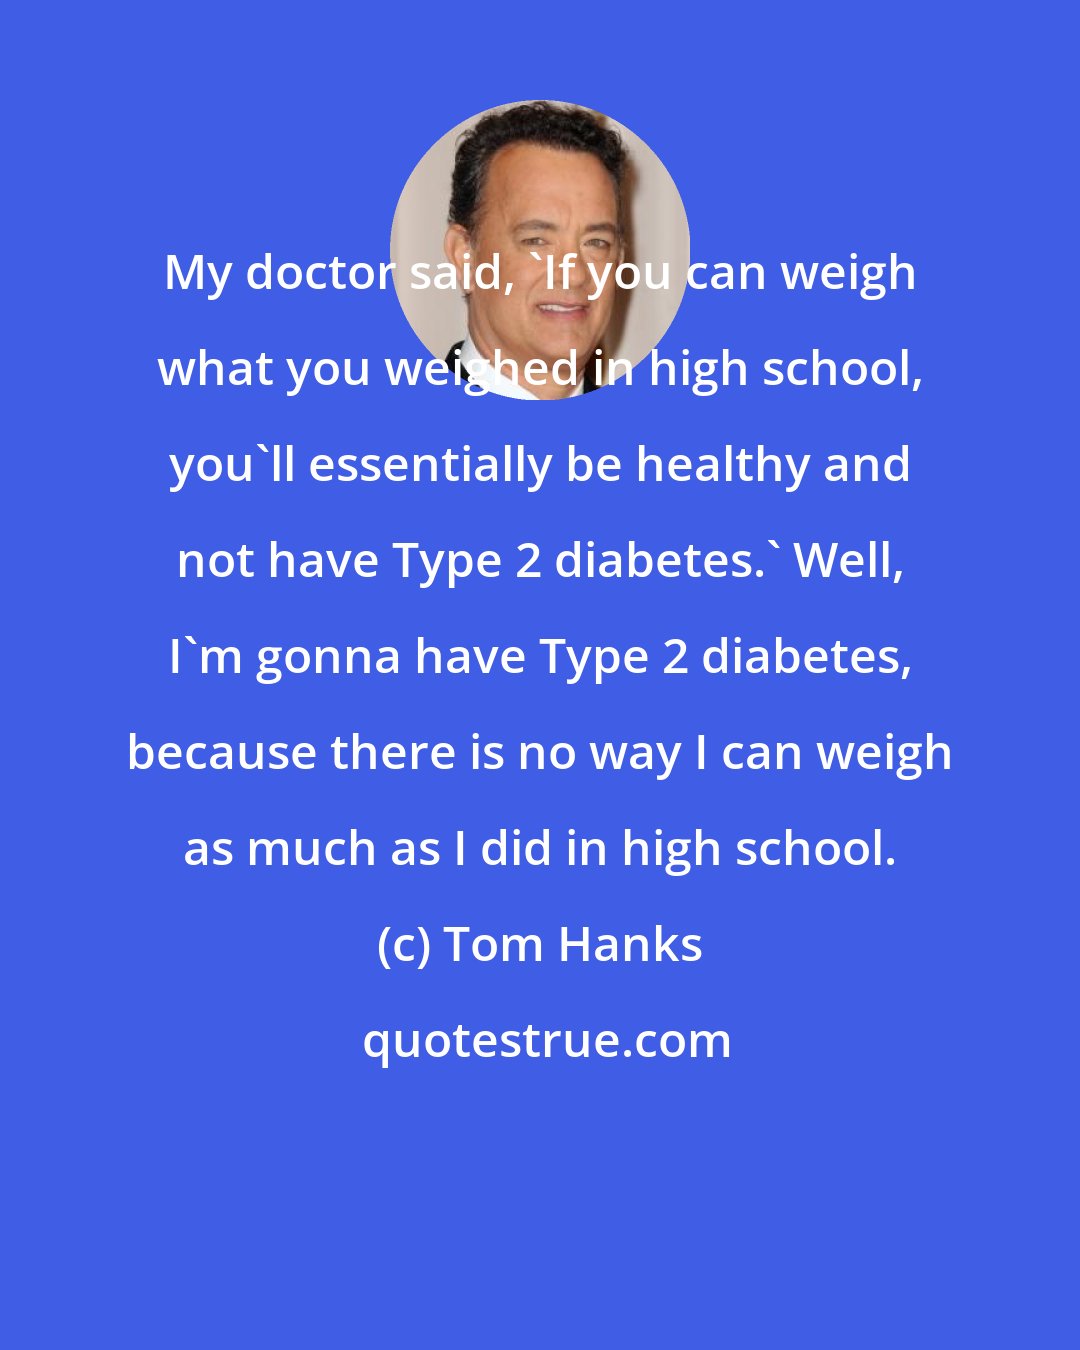 Tom Hanks: My doctor said, 'If you can weigh what you weighed in high school, you'll essentially be healthy and not have Type 2 diabetes.' Well, I'm gonna have Type 2 diabetes, because there is no way I can weigh as much as I did in high school.